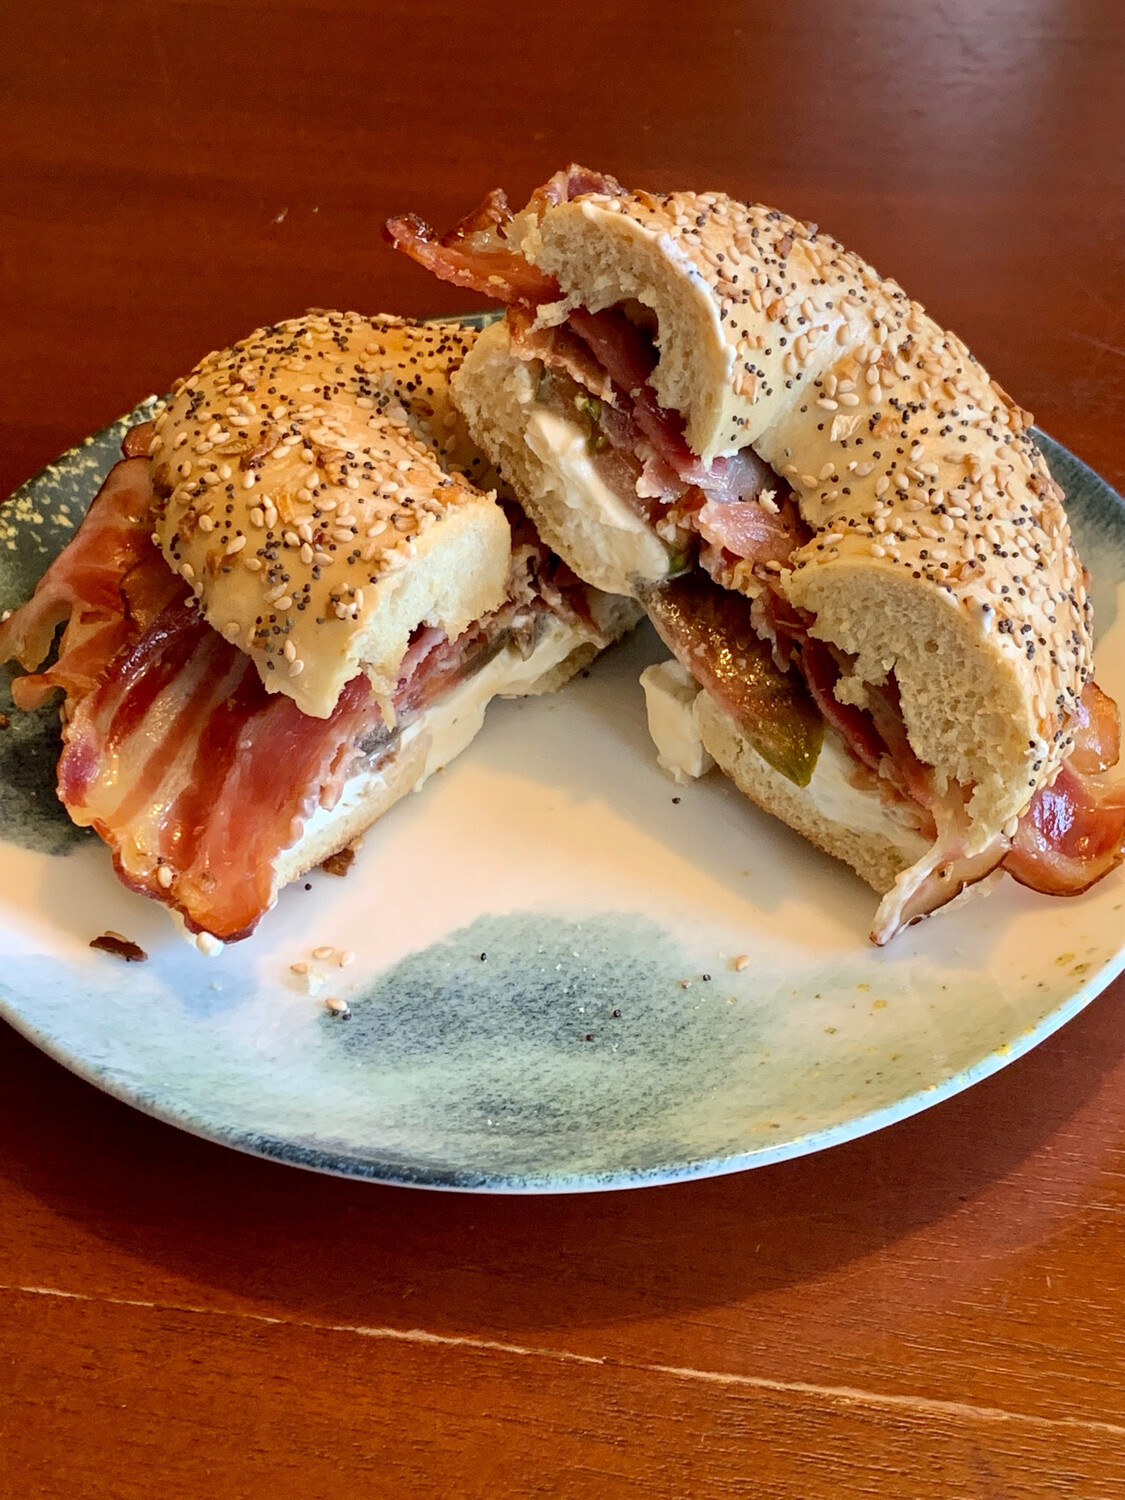 New York Bagel or "Hard" Roll, Polish Bacon, Tomato, and Cream Cheese Sandwich